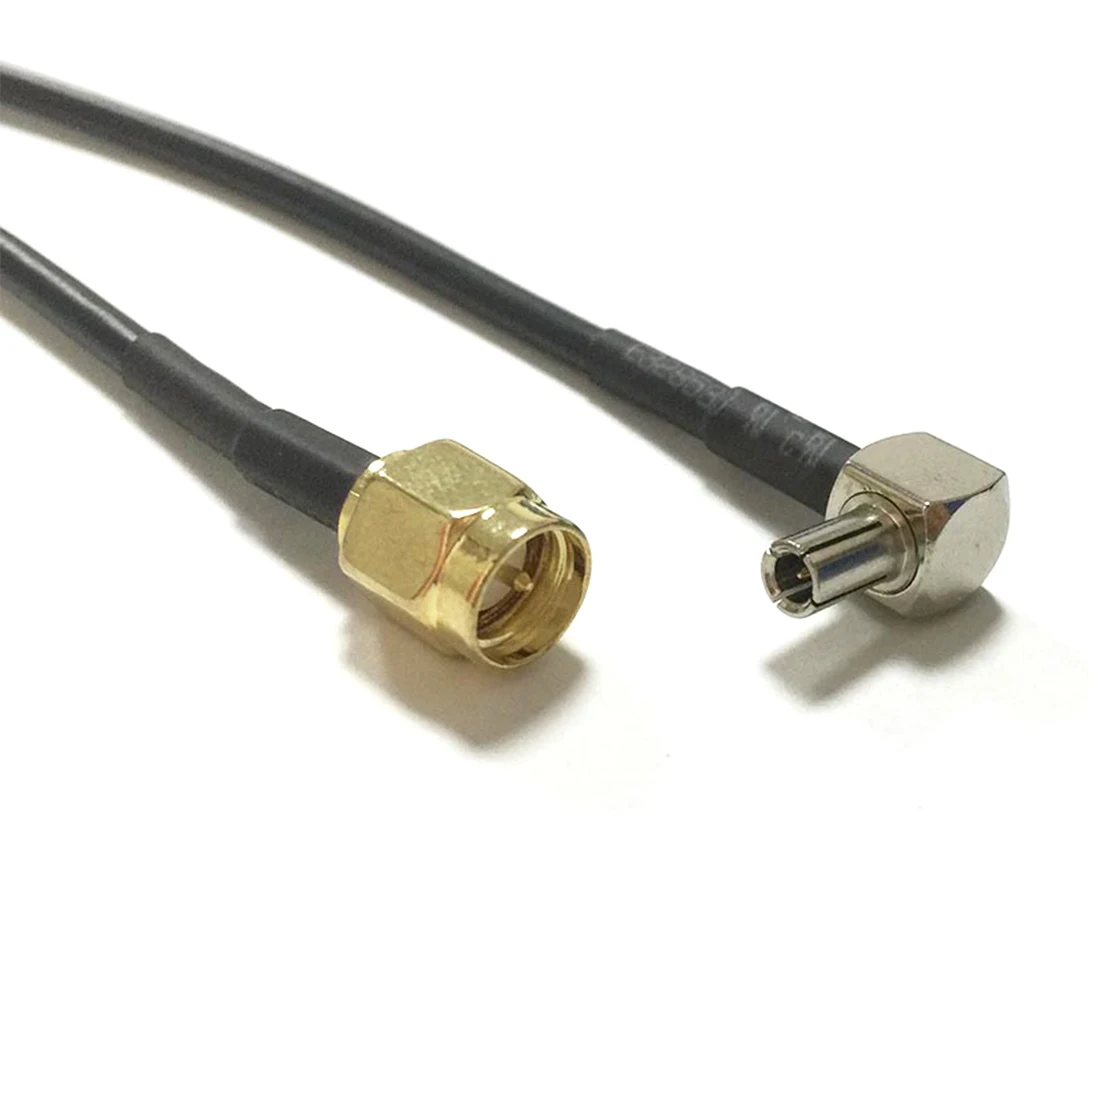 

New Wireless Modem Wire SMA Male Plug To TS9 Right Angle Connector RG174 Cable 20CM 8" Pigtail Wholesale